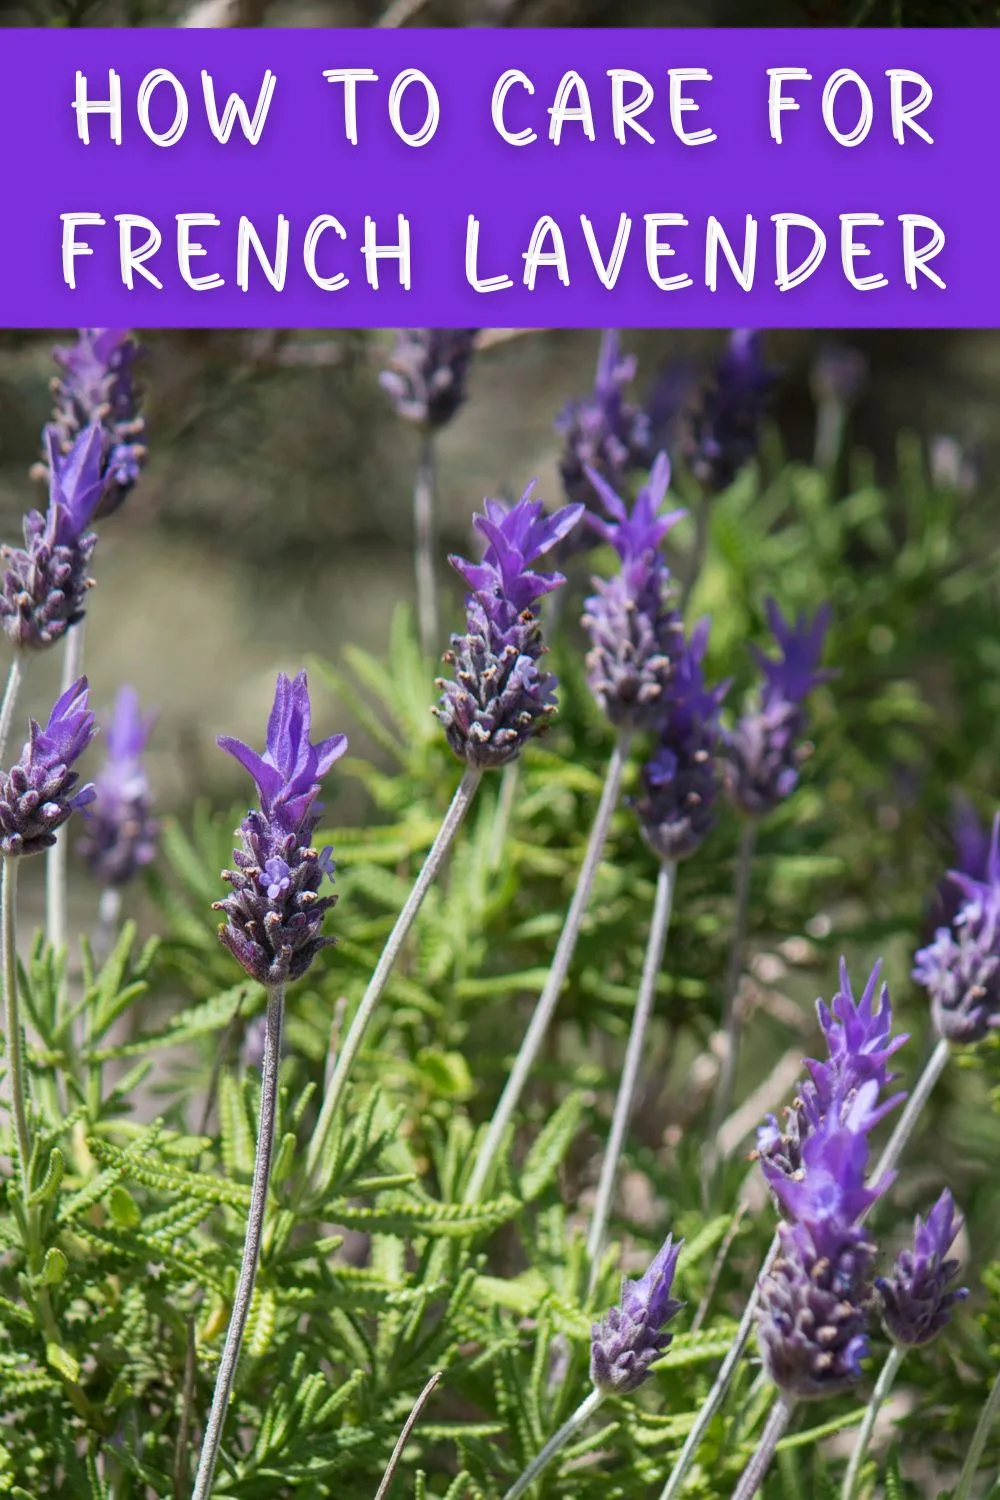 How to care for French lavender.